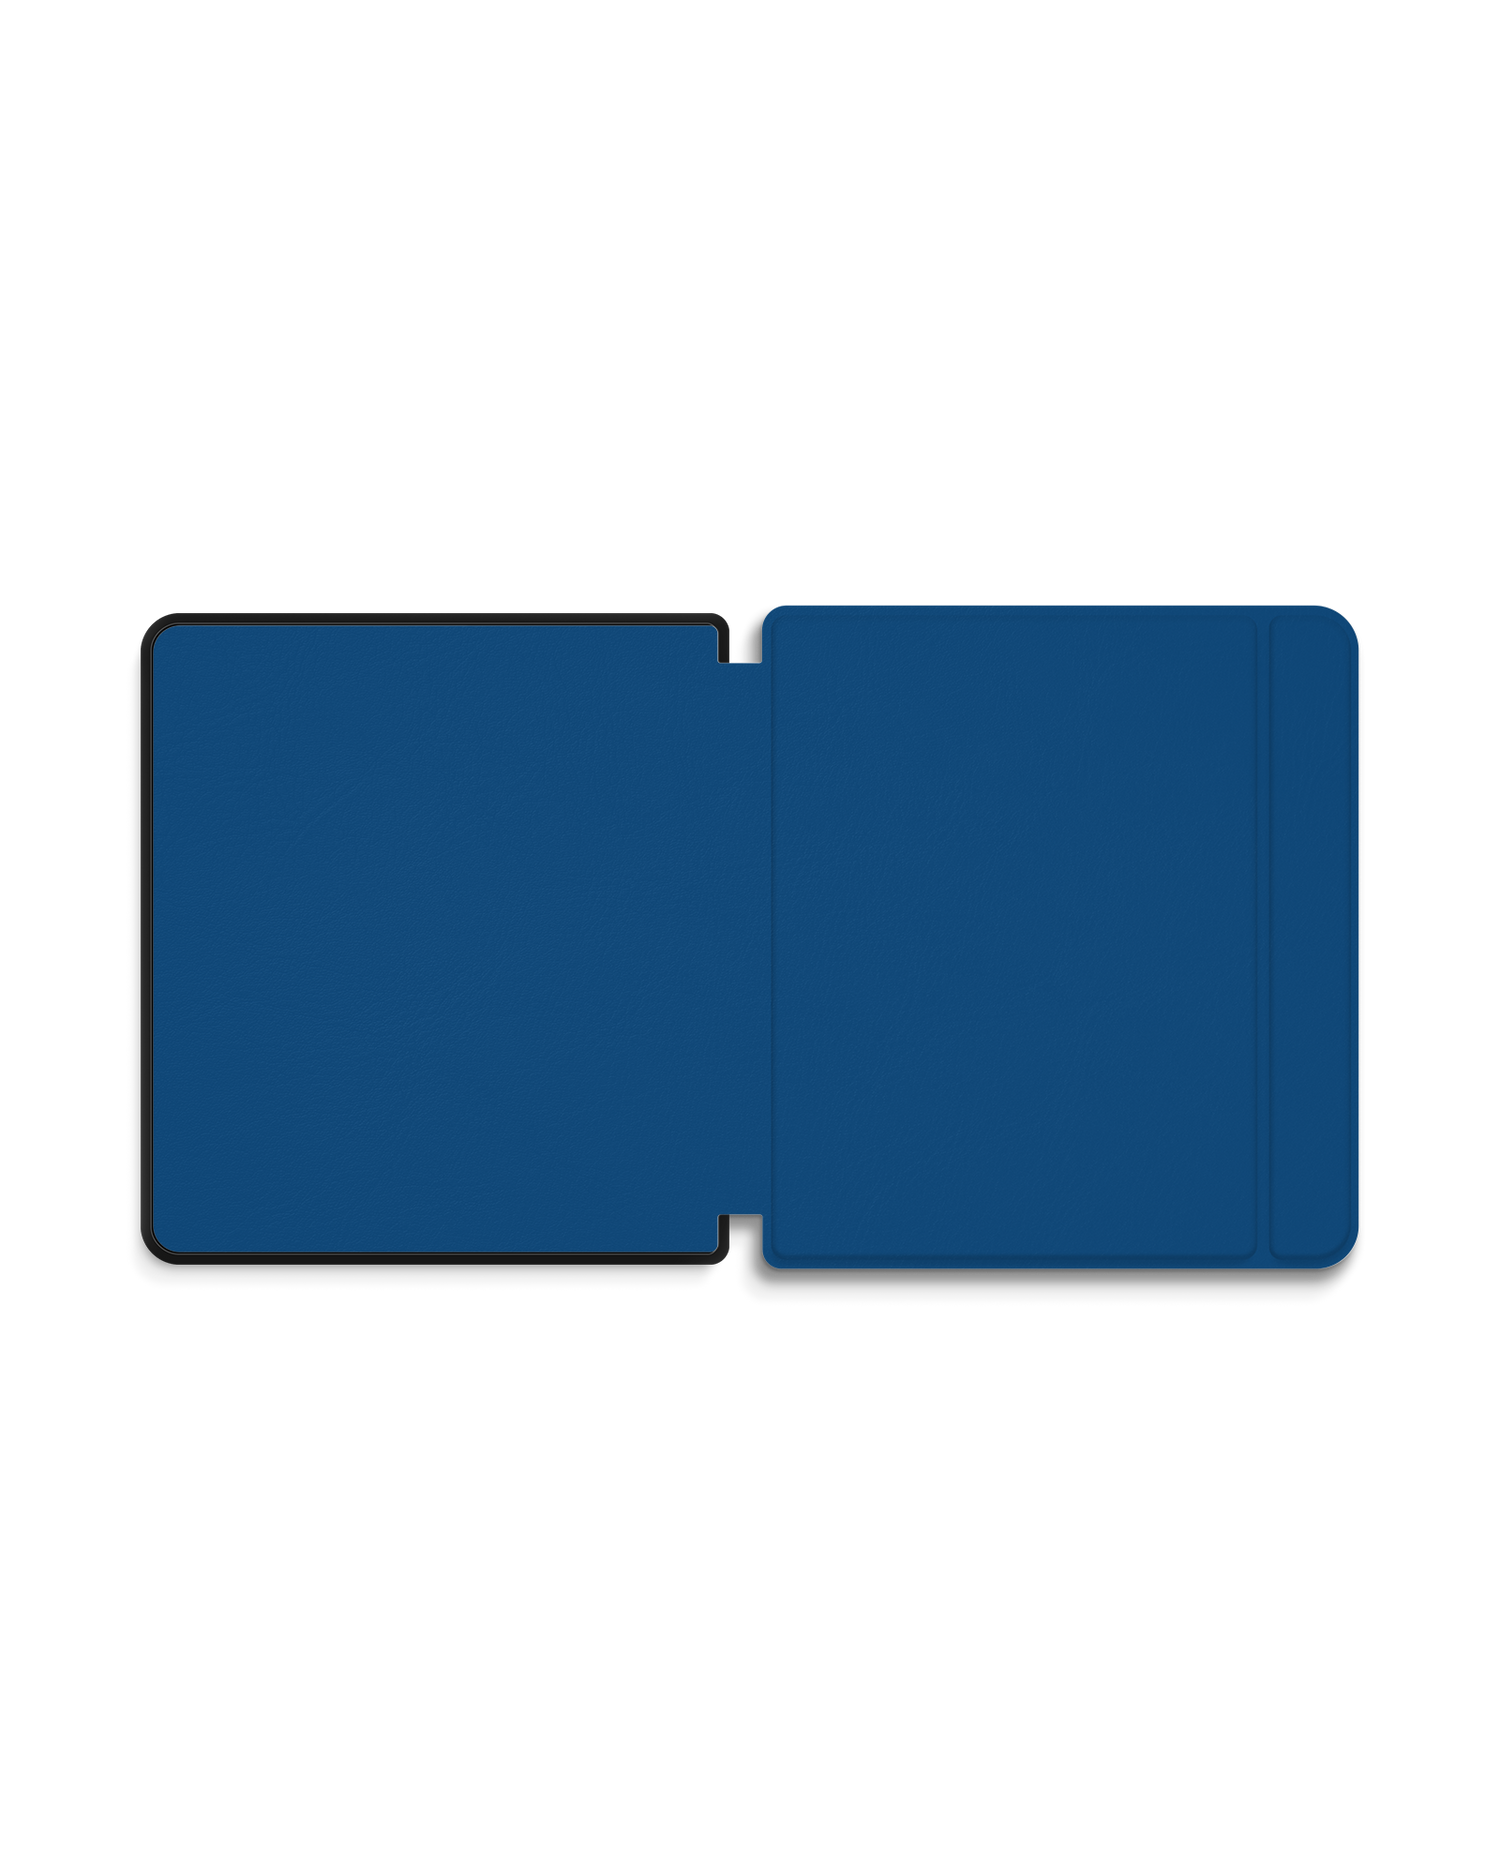 CLASSIC BLUE eReader Smart Case for tolino epos 2: Opened exterior view